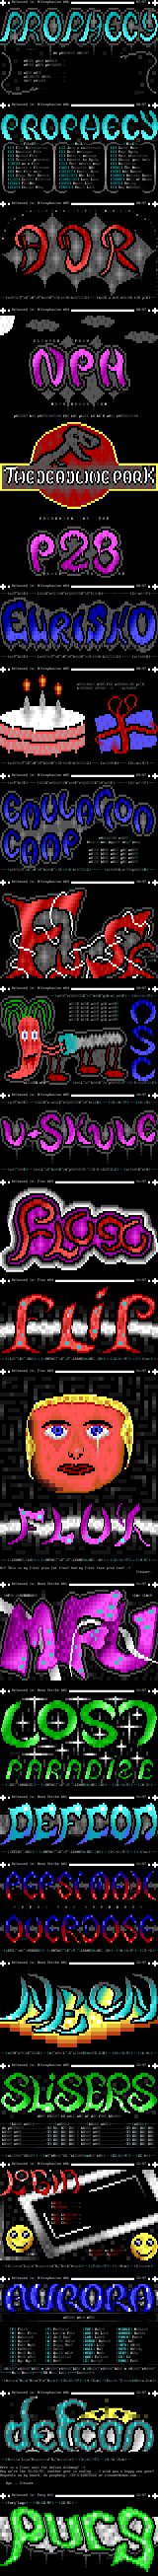 1997 Ansi Collection by Cleaner